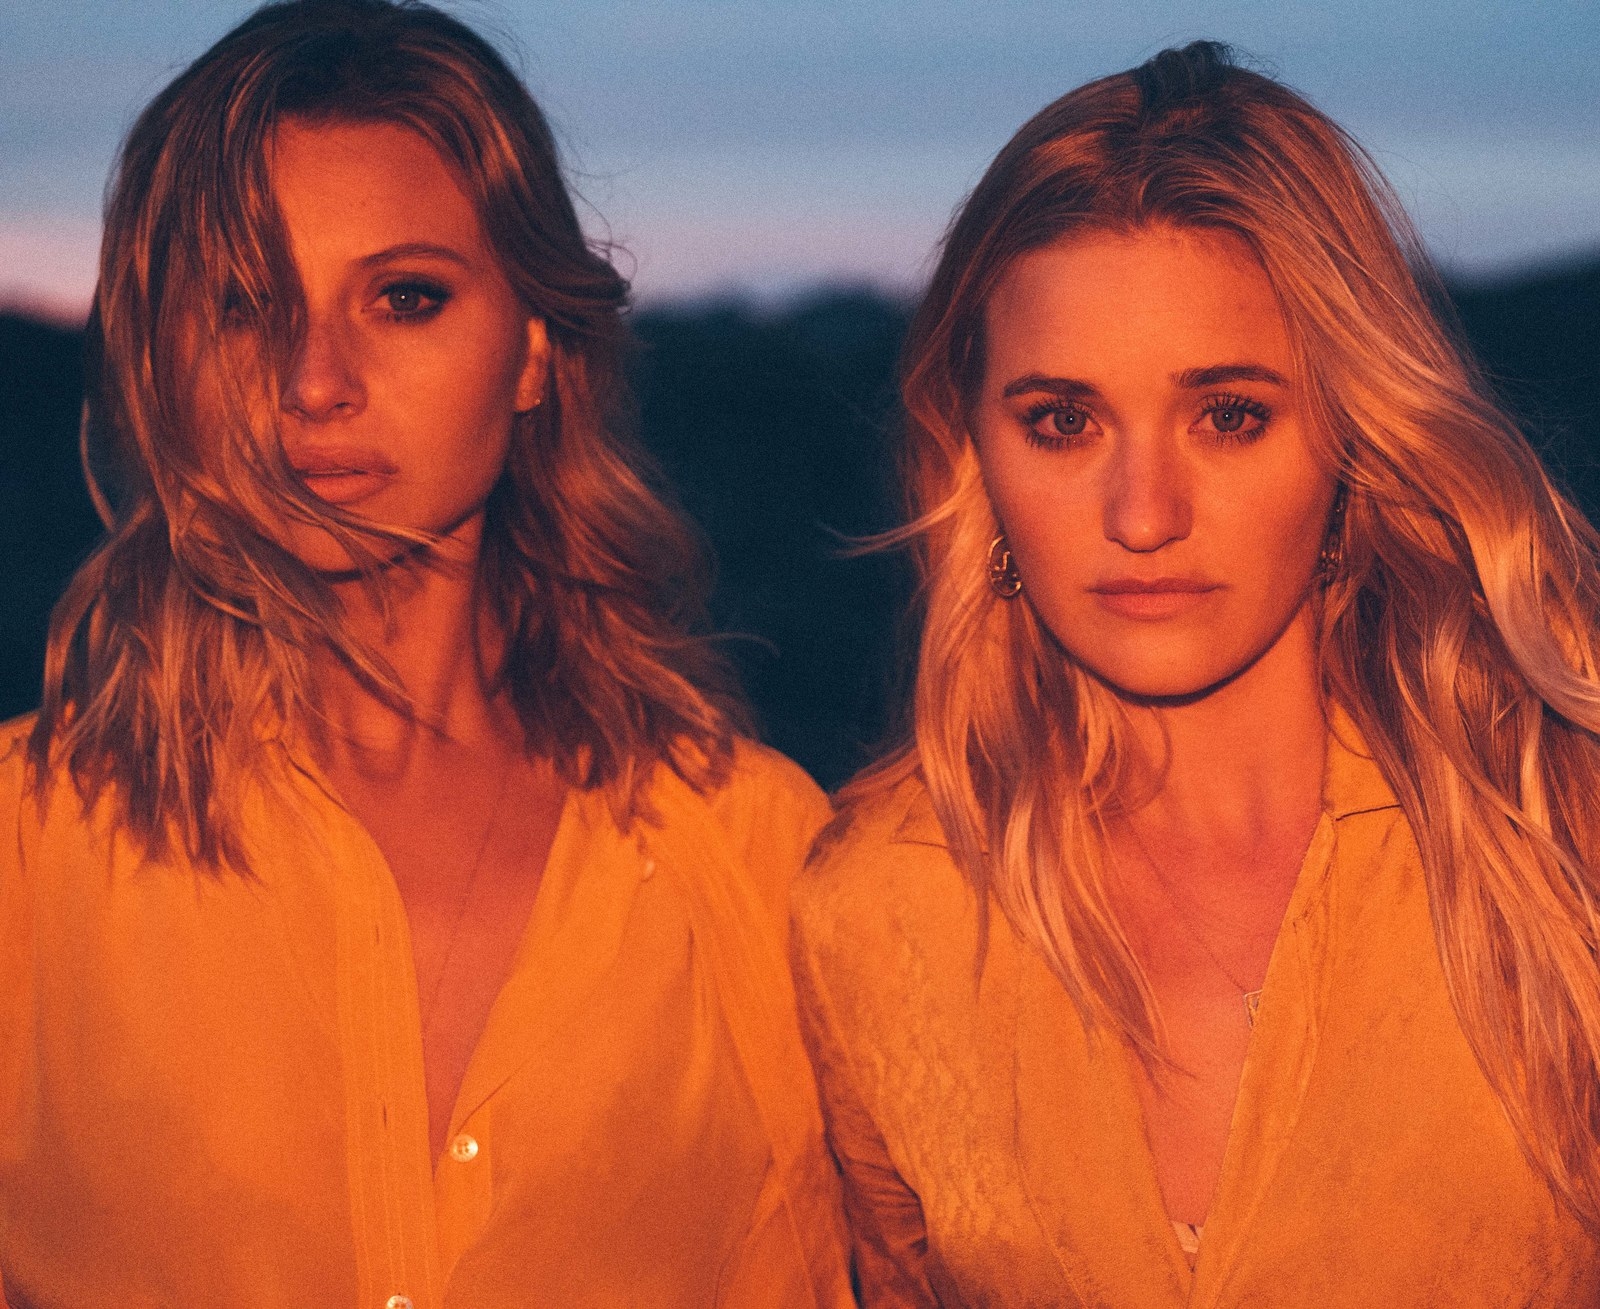 Aly and aj sexy